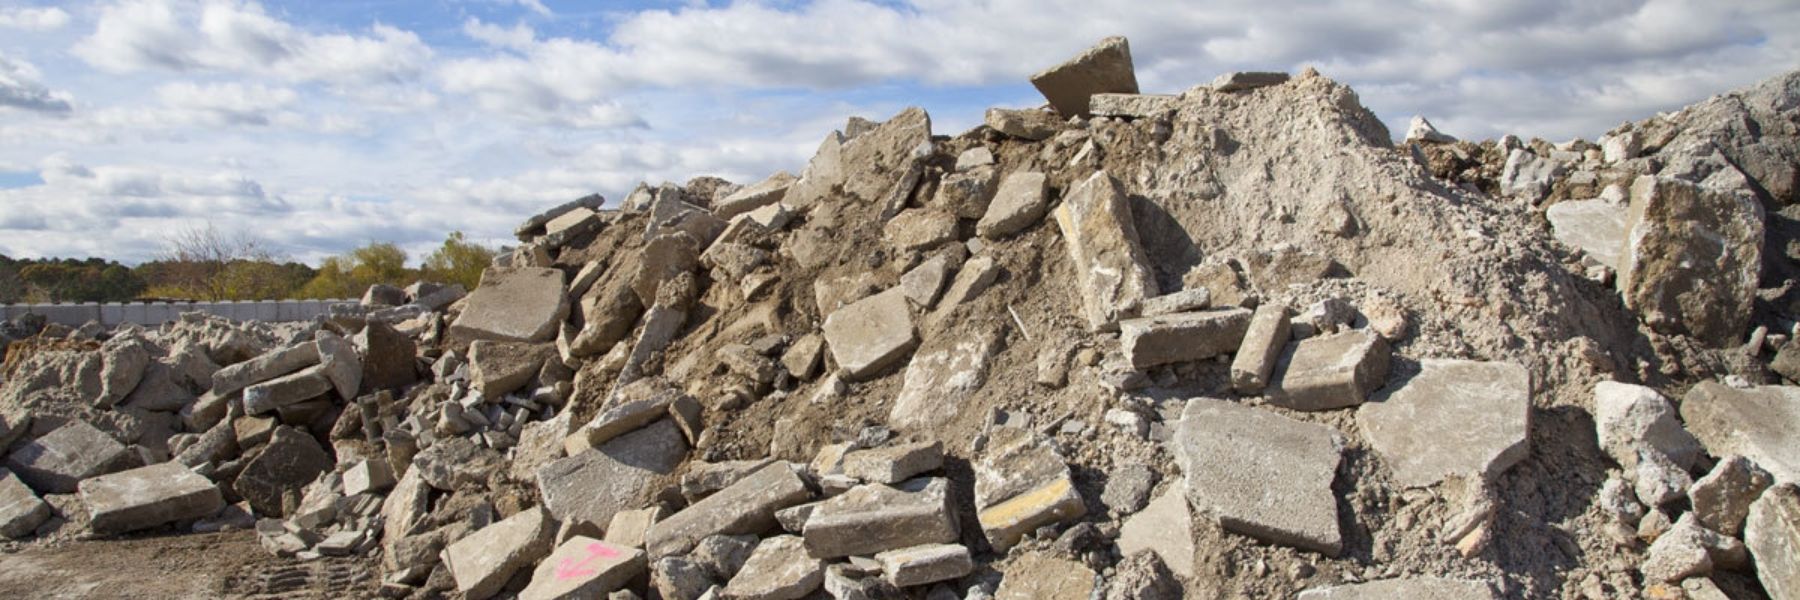 Are Recycled Concrete Aggregates Sustainable?